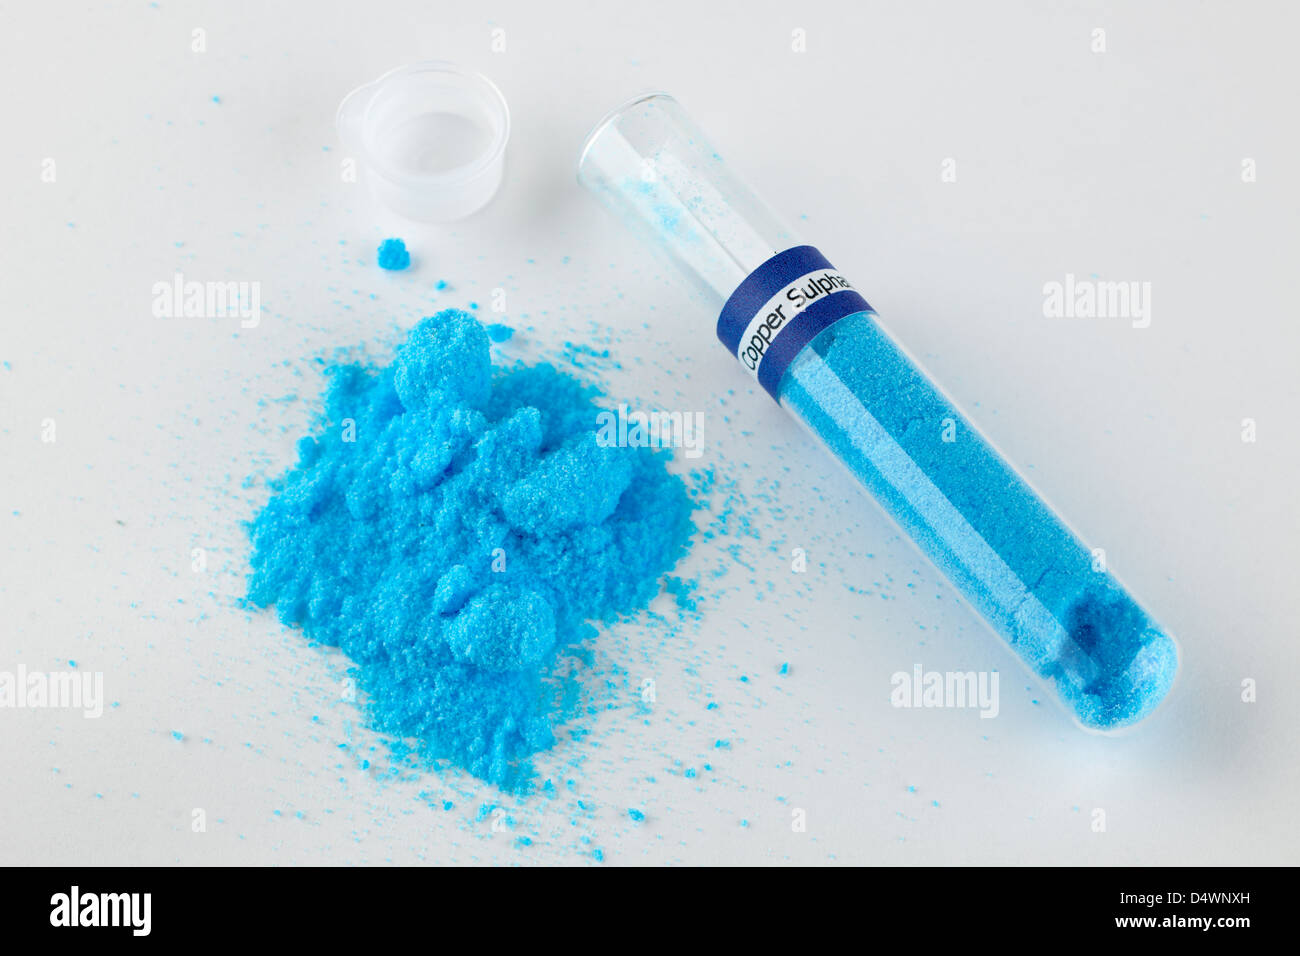 Pile of Copper Sulphate CuSO4*5H2O chemical  and test tube Stock Photo